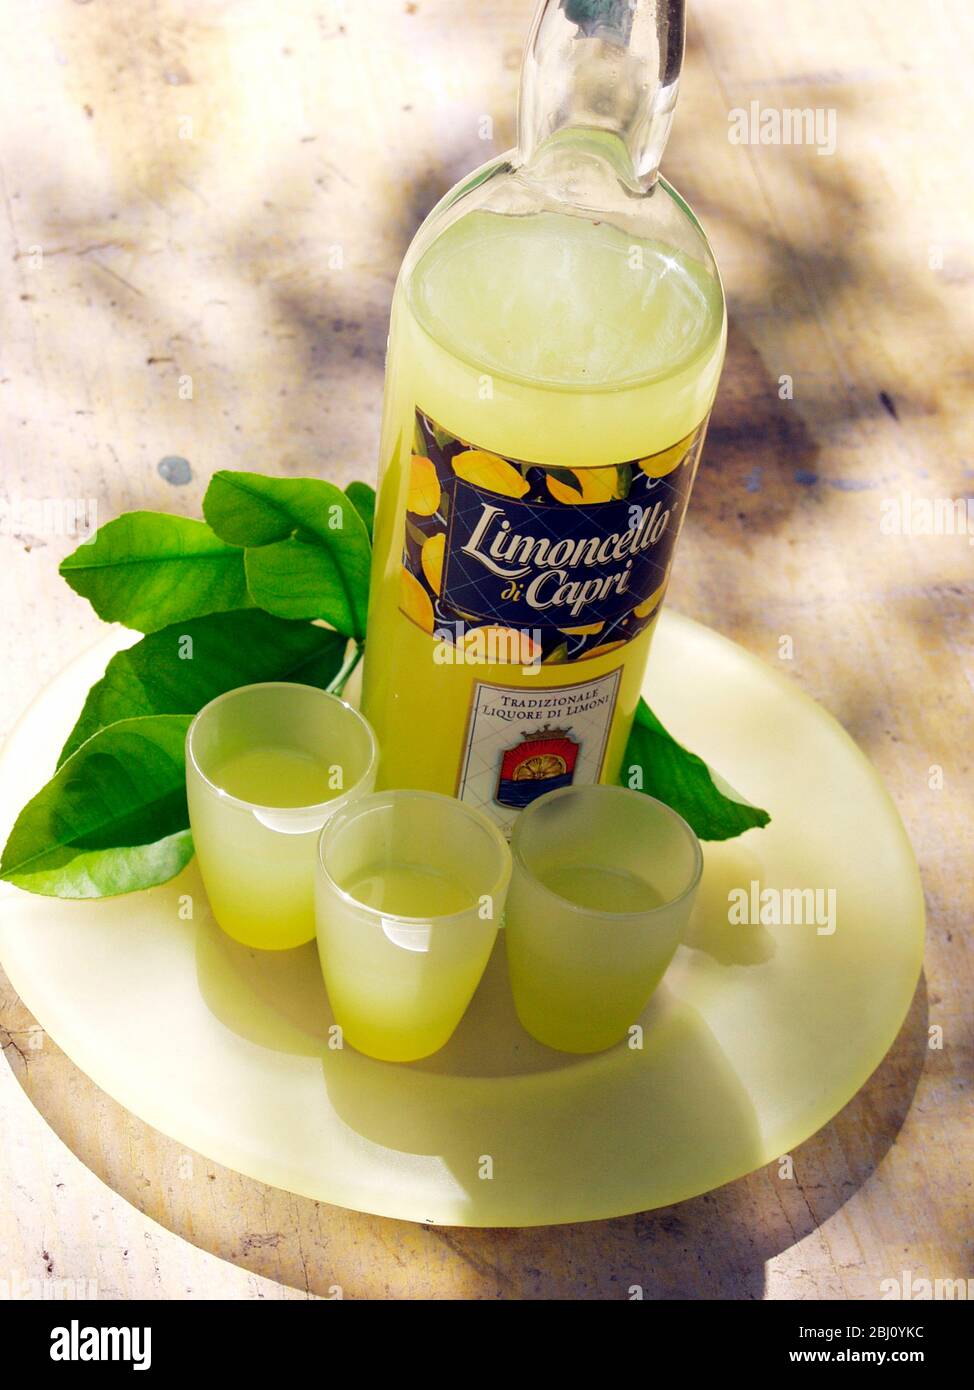 Bottle of limoncello liqueur with three glasses and lemon tree leaves - Stock Photo